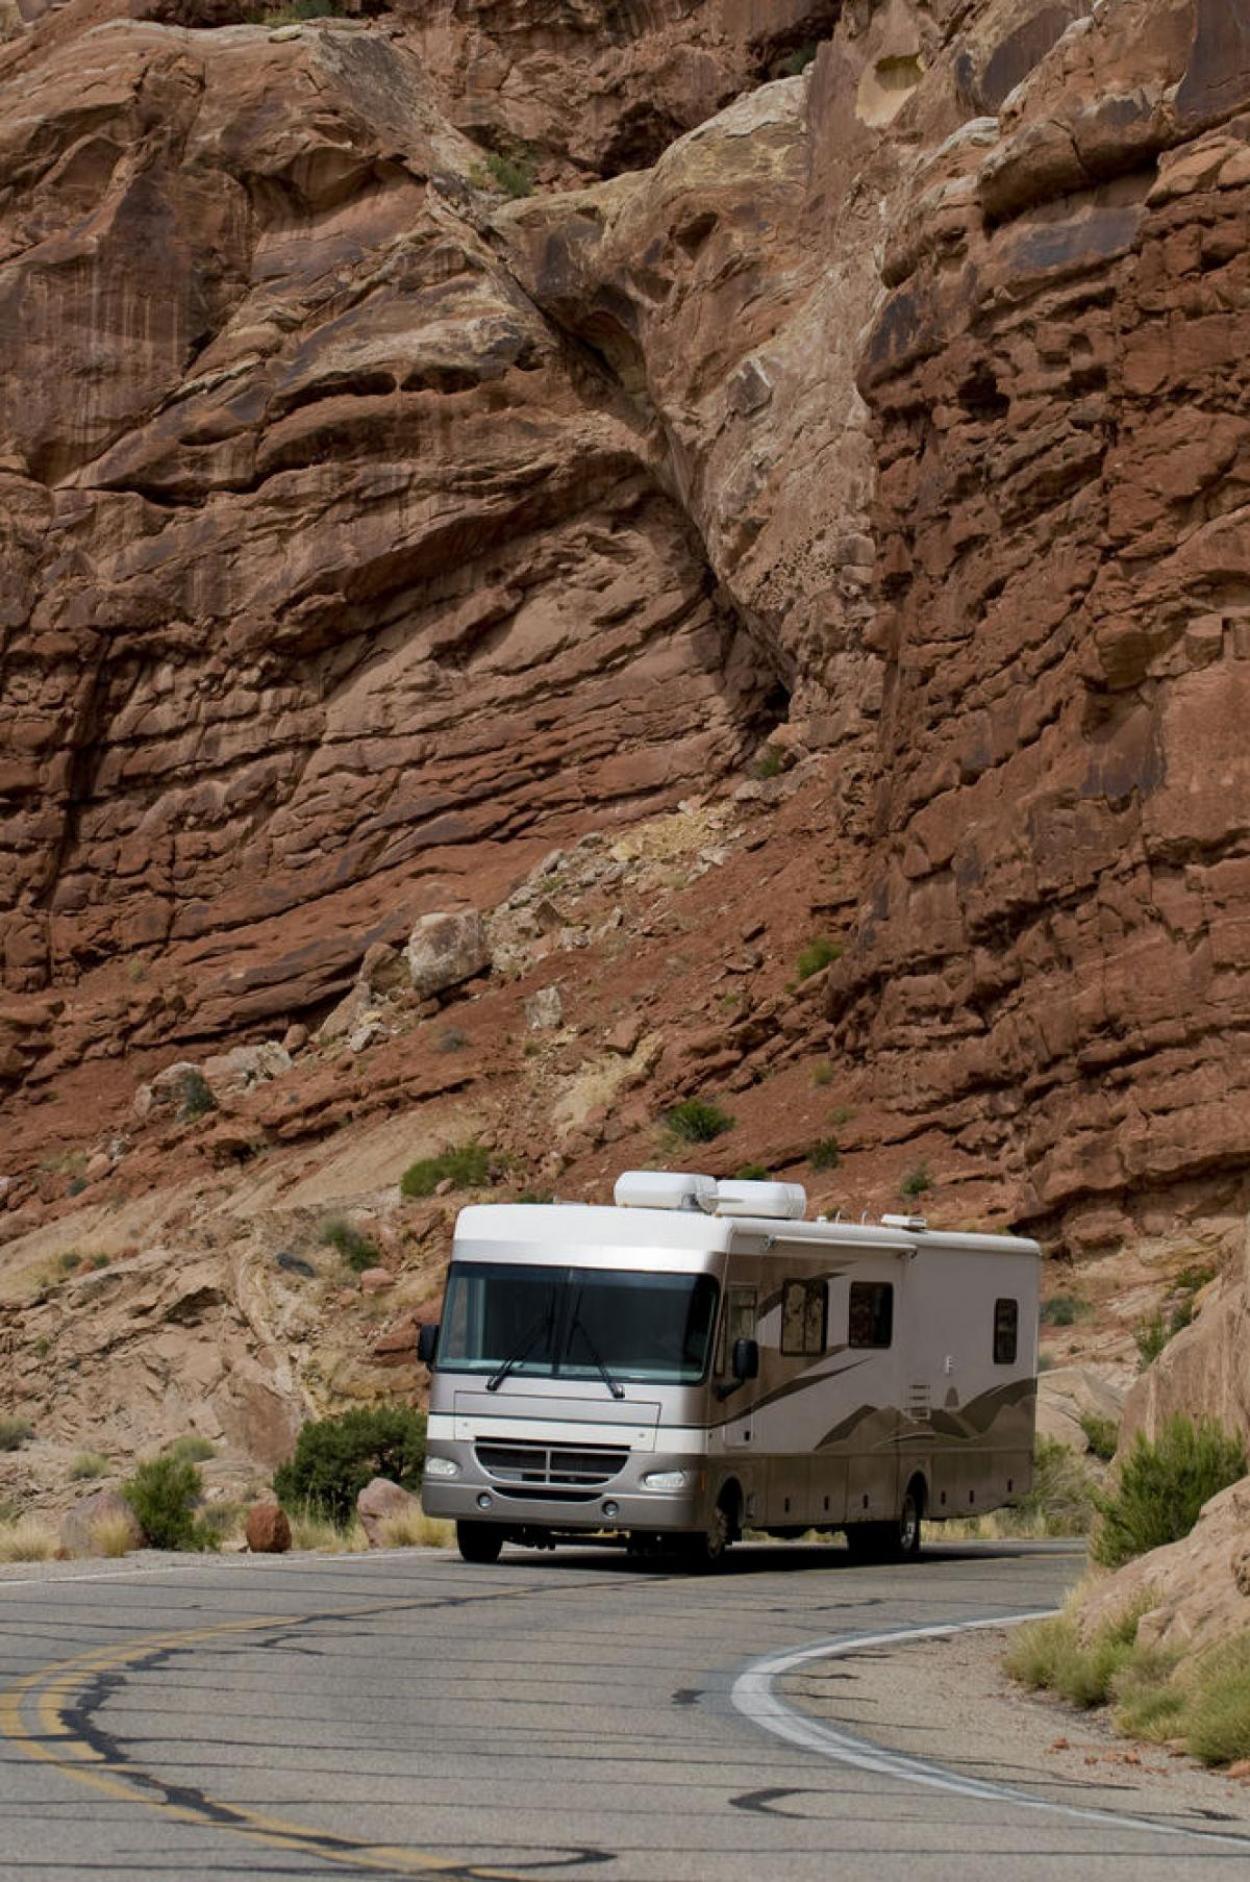 What Do I Need To Start Driving An RV?